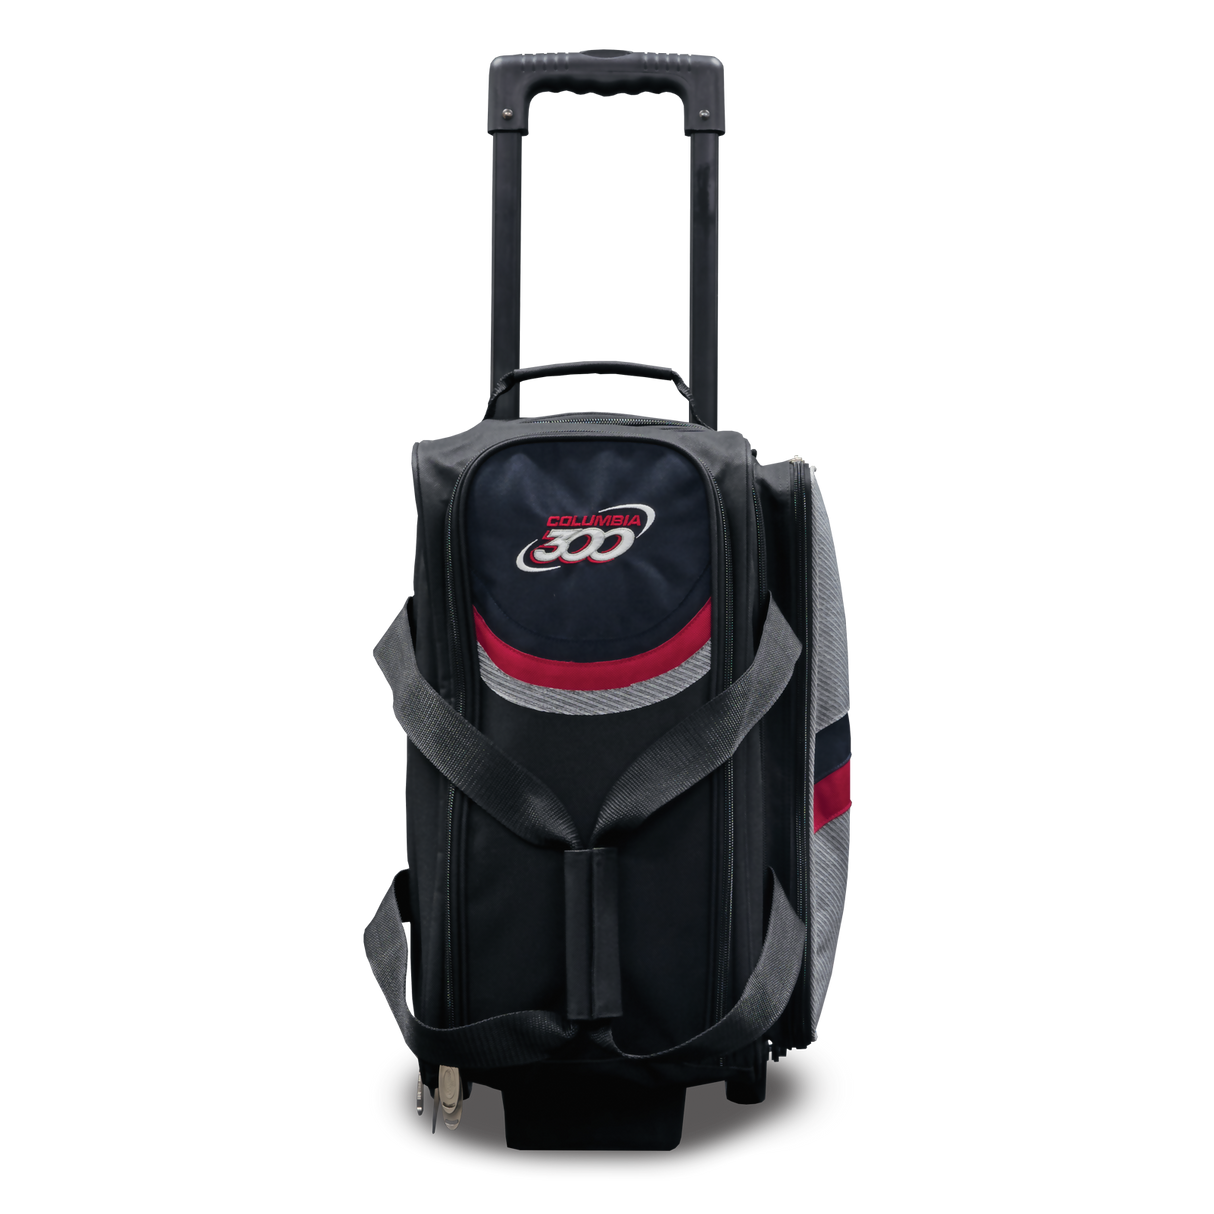 Columbia 300 Boss Double 2 Ball Roller Red Bowling Bag suitcase league tournament play sale discount coupon online pba tour